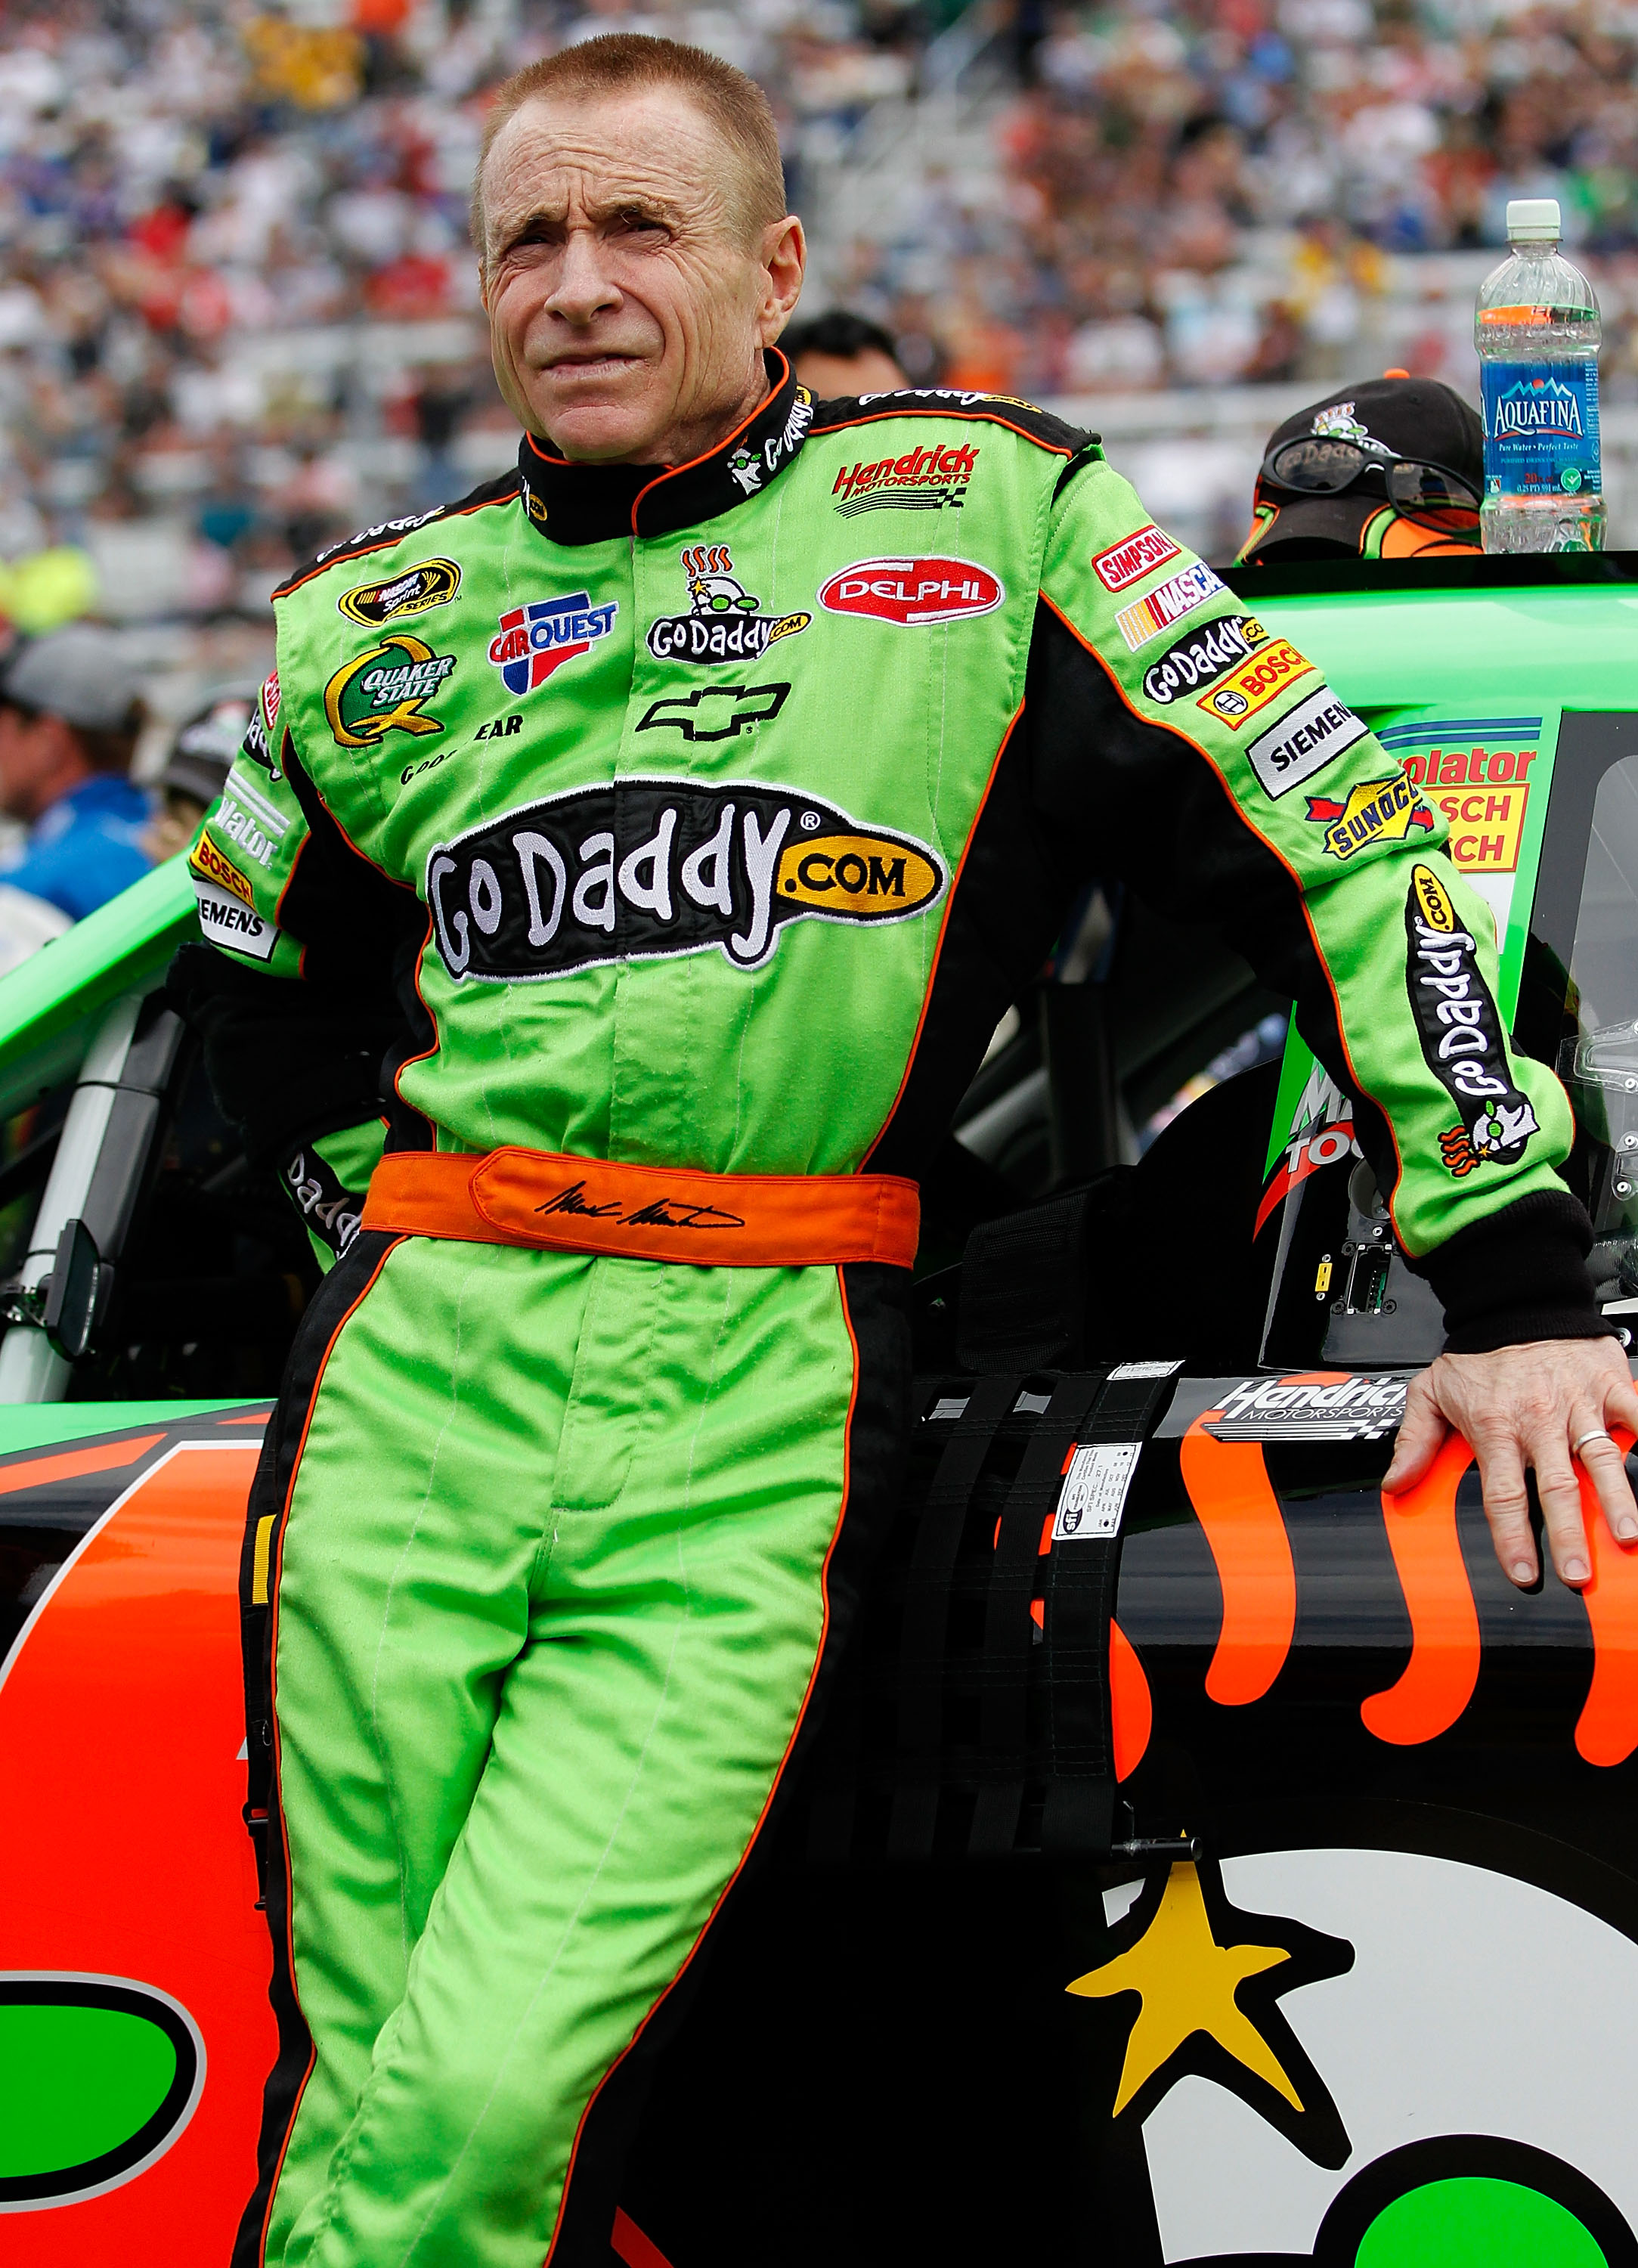 BRISTOL, TN - MARCH 20: Mark Martin, driver of the #5 GoDaddy.com Chevrolet, stands on the grid prior to the start of the NASCAR Sprint Cup Series Jeff Byrd 500 Presented By Food City at Bristol Motor Speedway on March 20, 2011 in Bristol, Tennessee.  (Ph